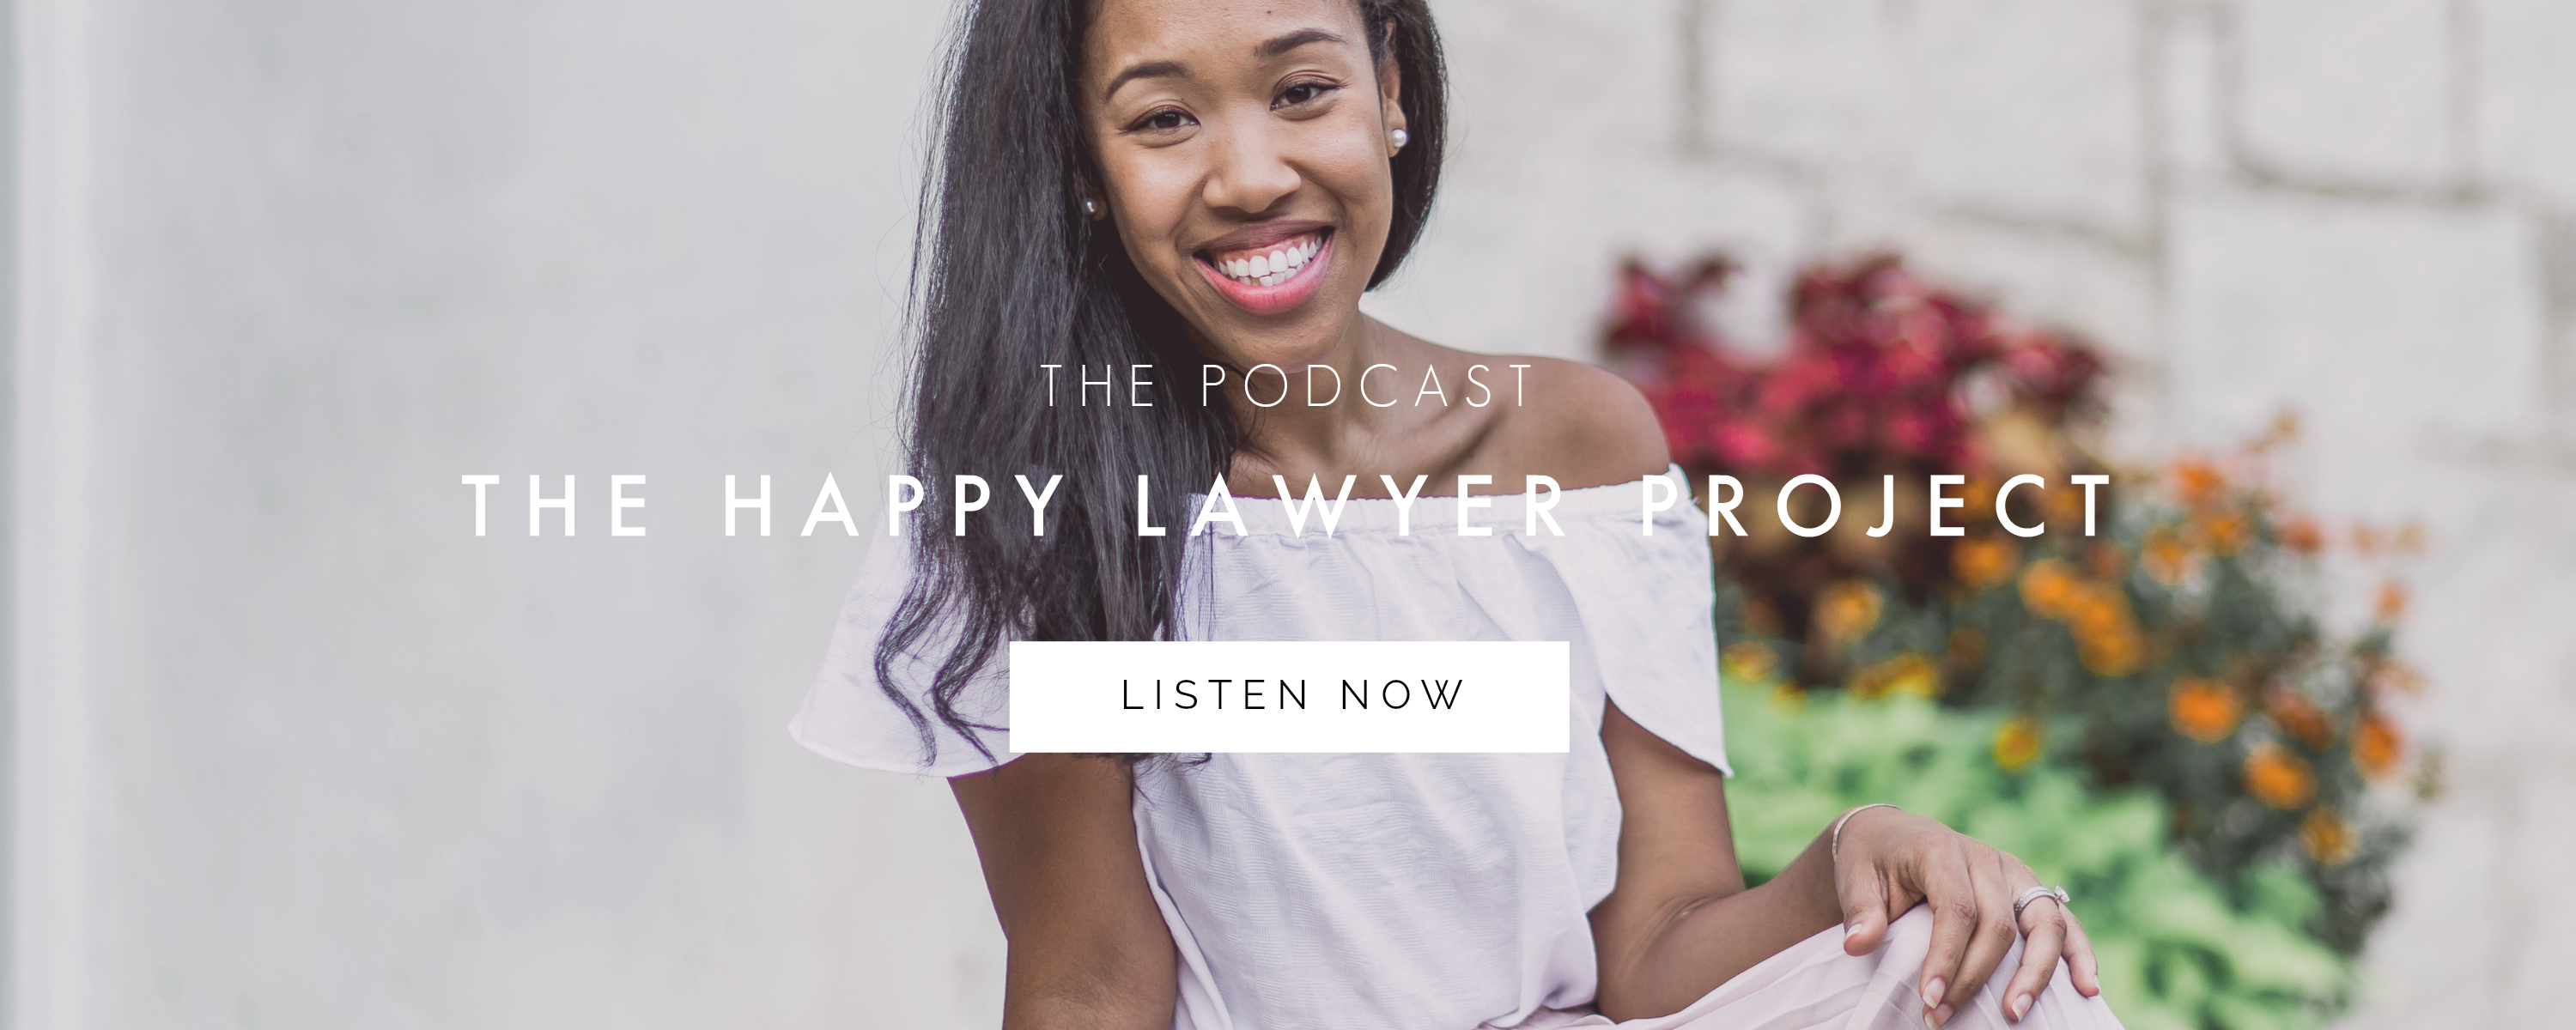 Lawyer The Project Life \u2013 in Finding Happiness Law Happy +